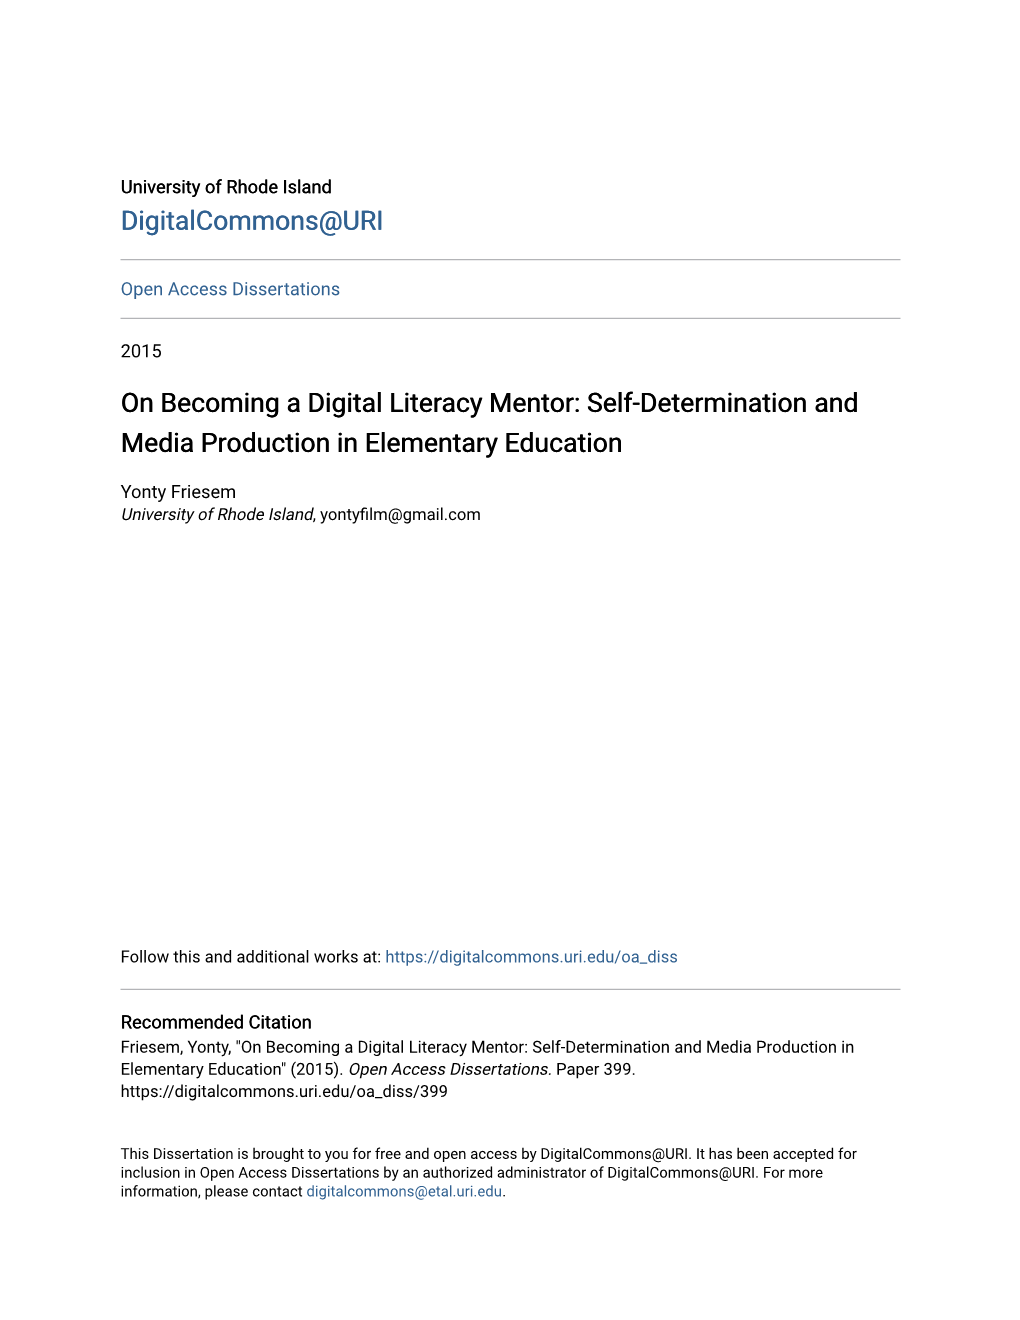 On Becoming a Digital Literacy Mentor: Self-Determination and Media Production in Elementary Education